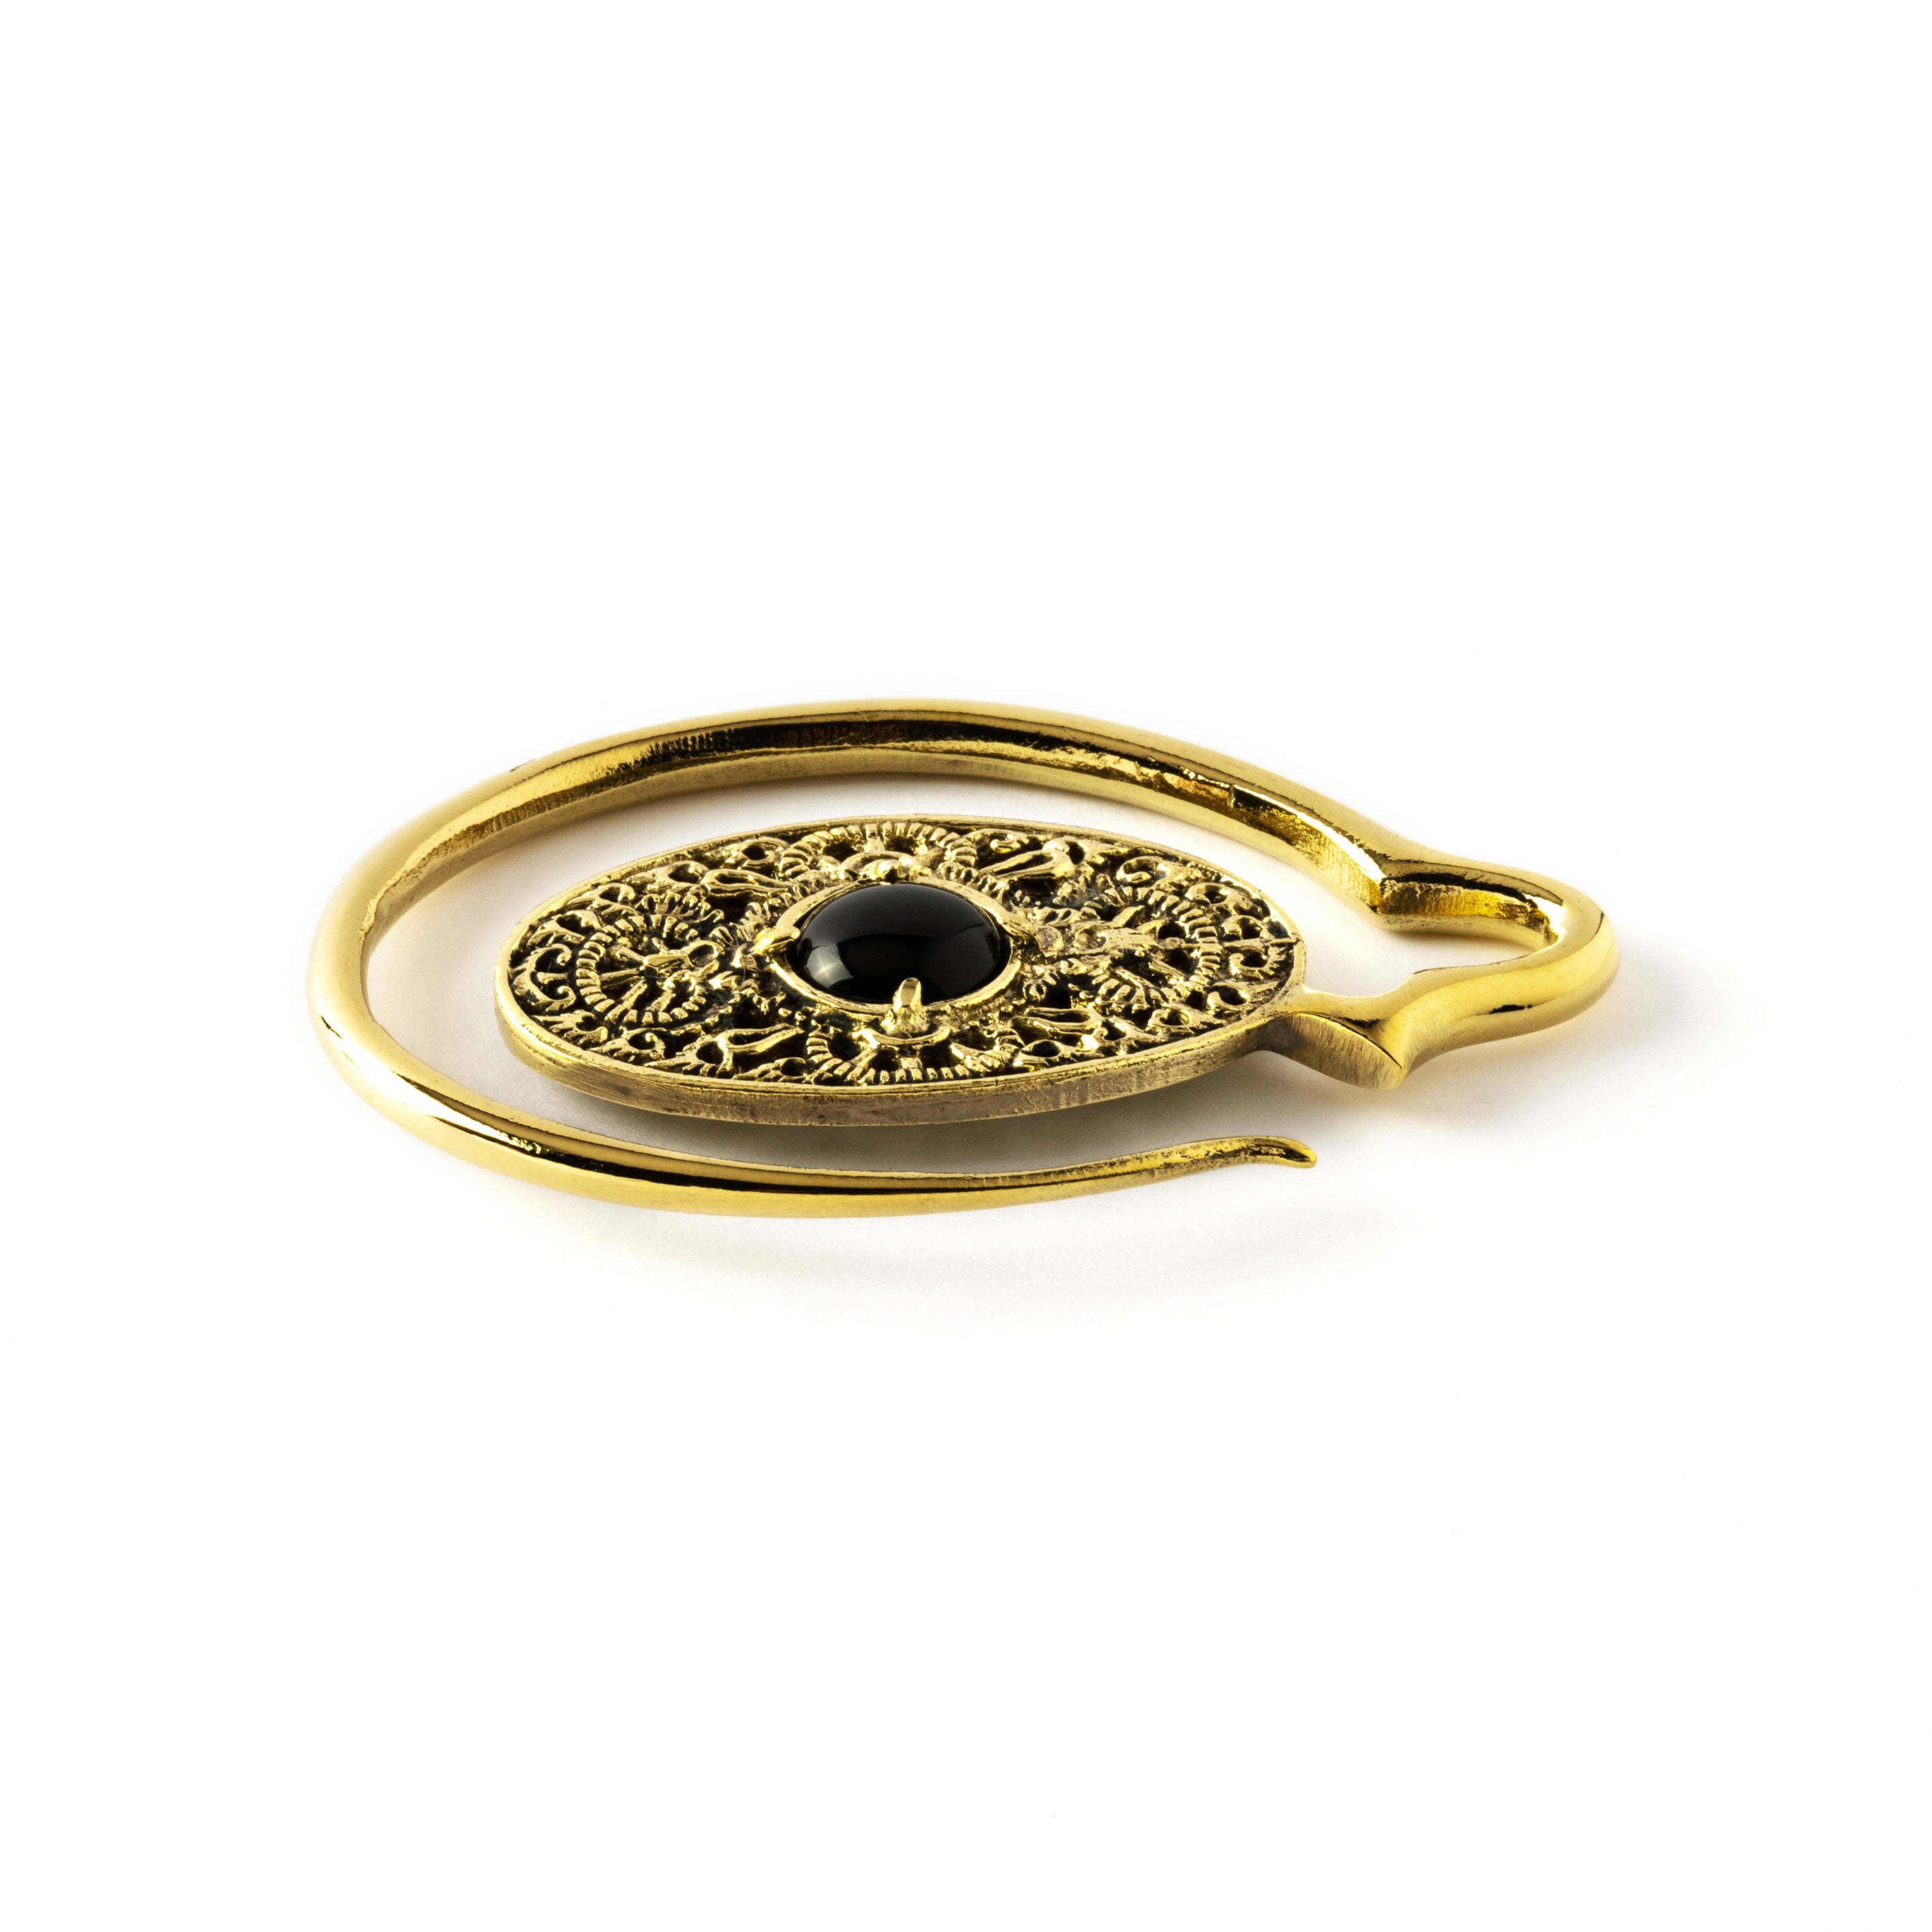 golden large ear weights hangers oval shaped with intricate filigree pattern an black onyx down view